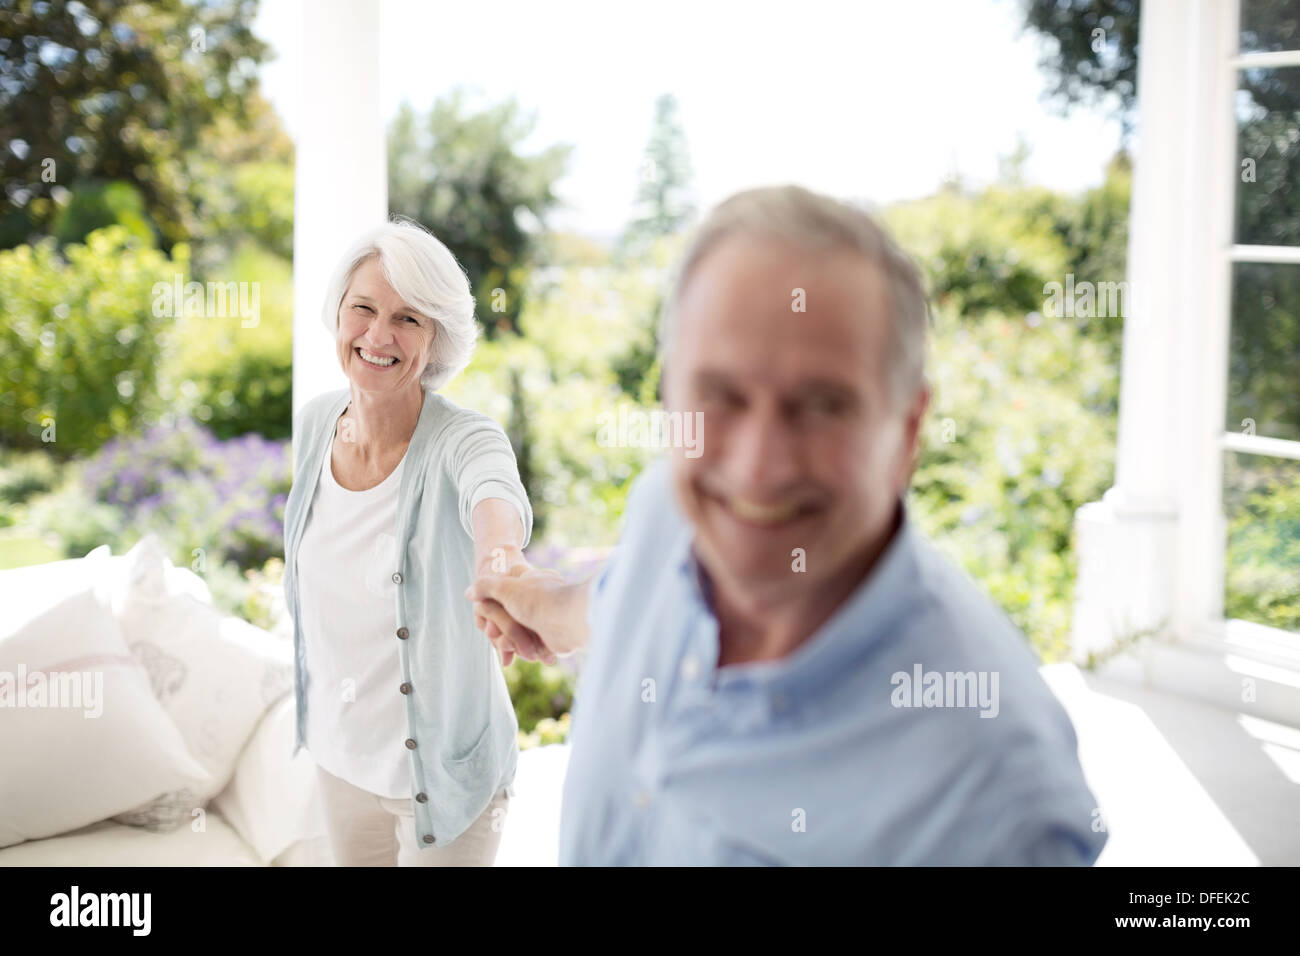 Senior couple holding hands on patio Banque D'Images